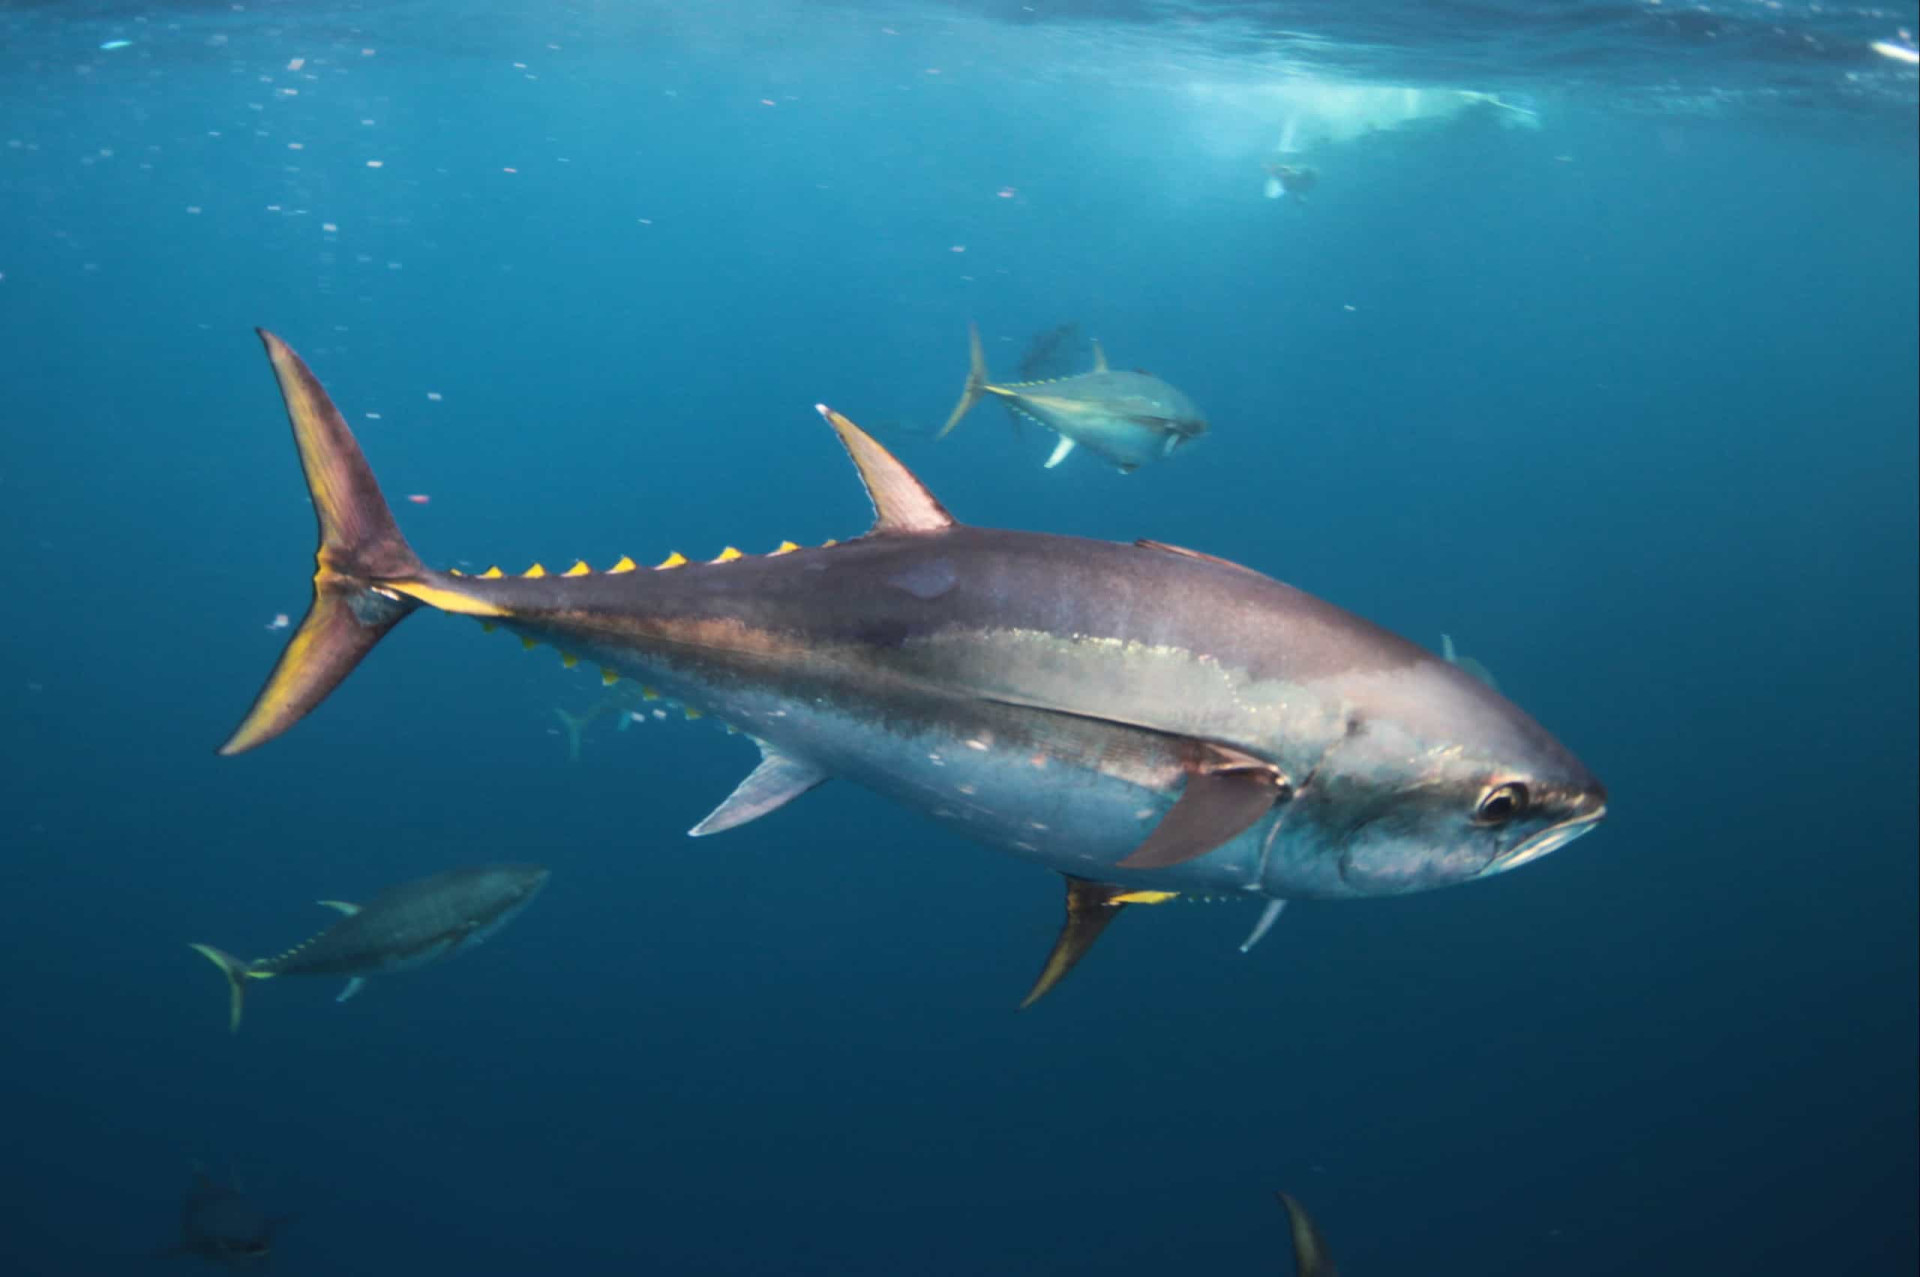 <p>Southern bluefin tuna, a type of large, fast-swimming fish, can be found in open waters of the Southern Hemisphere. According to the Australian Marine Conservation Society, the species is critically endangered, with only 5% of its original population remaining due to fishing.</p><p>You may also like:<a href="https://www.starsinsider.com/n/186189?utm_source=msn.com&utm_medium=display&utm_campaign=referral_description&utm_content=578219en-en"> The theories behind the ever-mysterious death of Edgar Allan Poe</a></p>